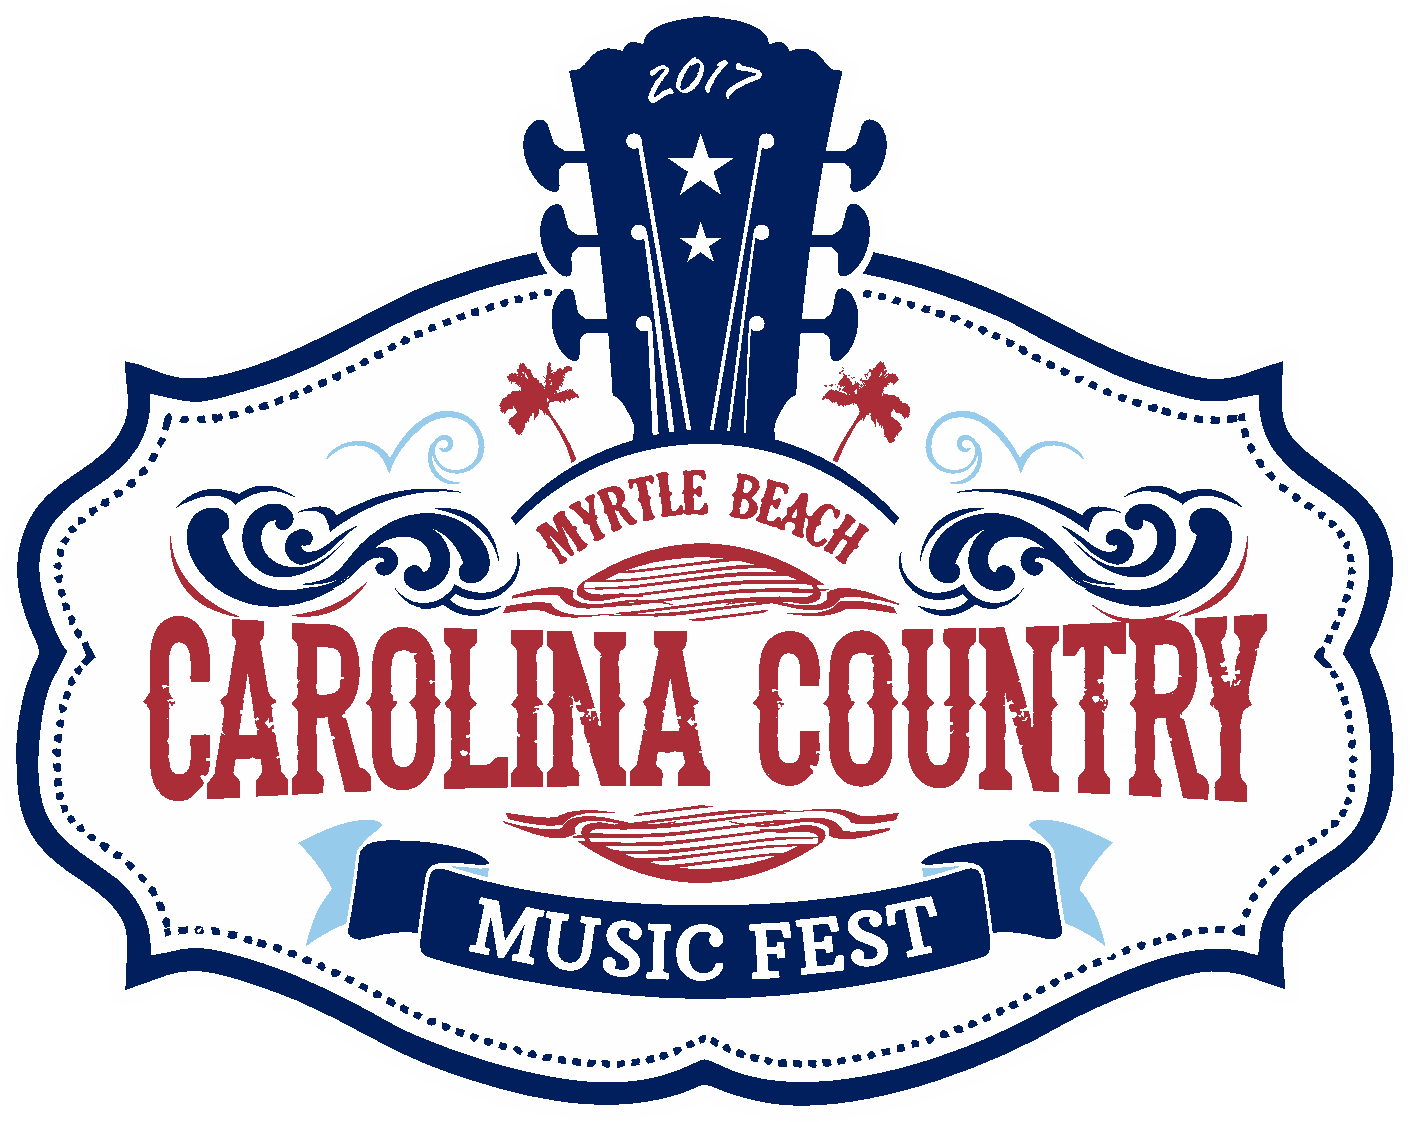 Carolina Country Music Festival - Country Music Festival 2018 Myrtle Beach (1410x1122)